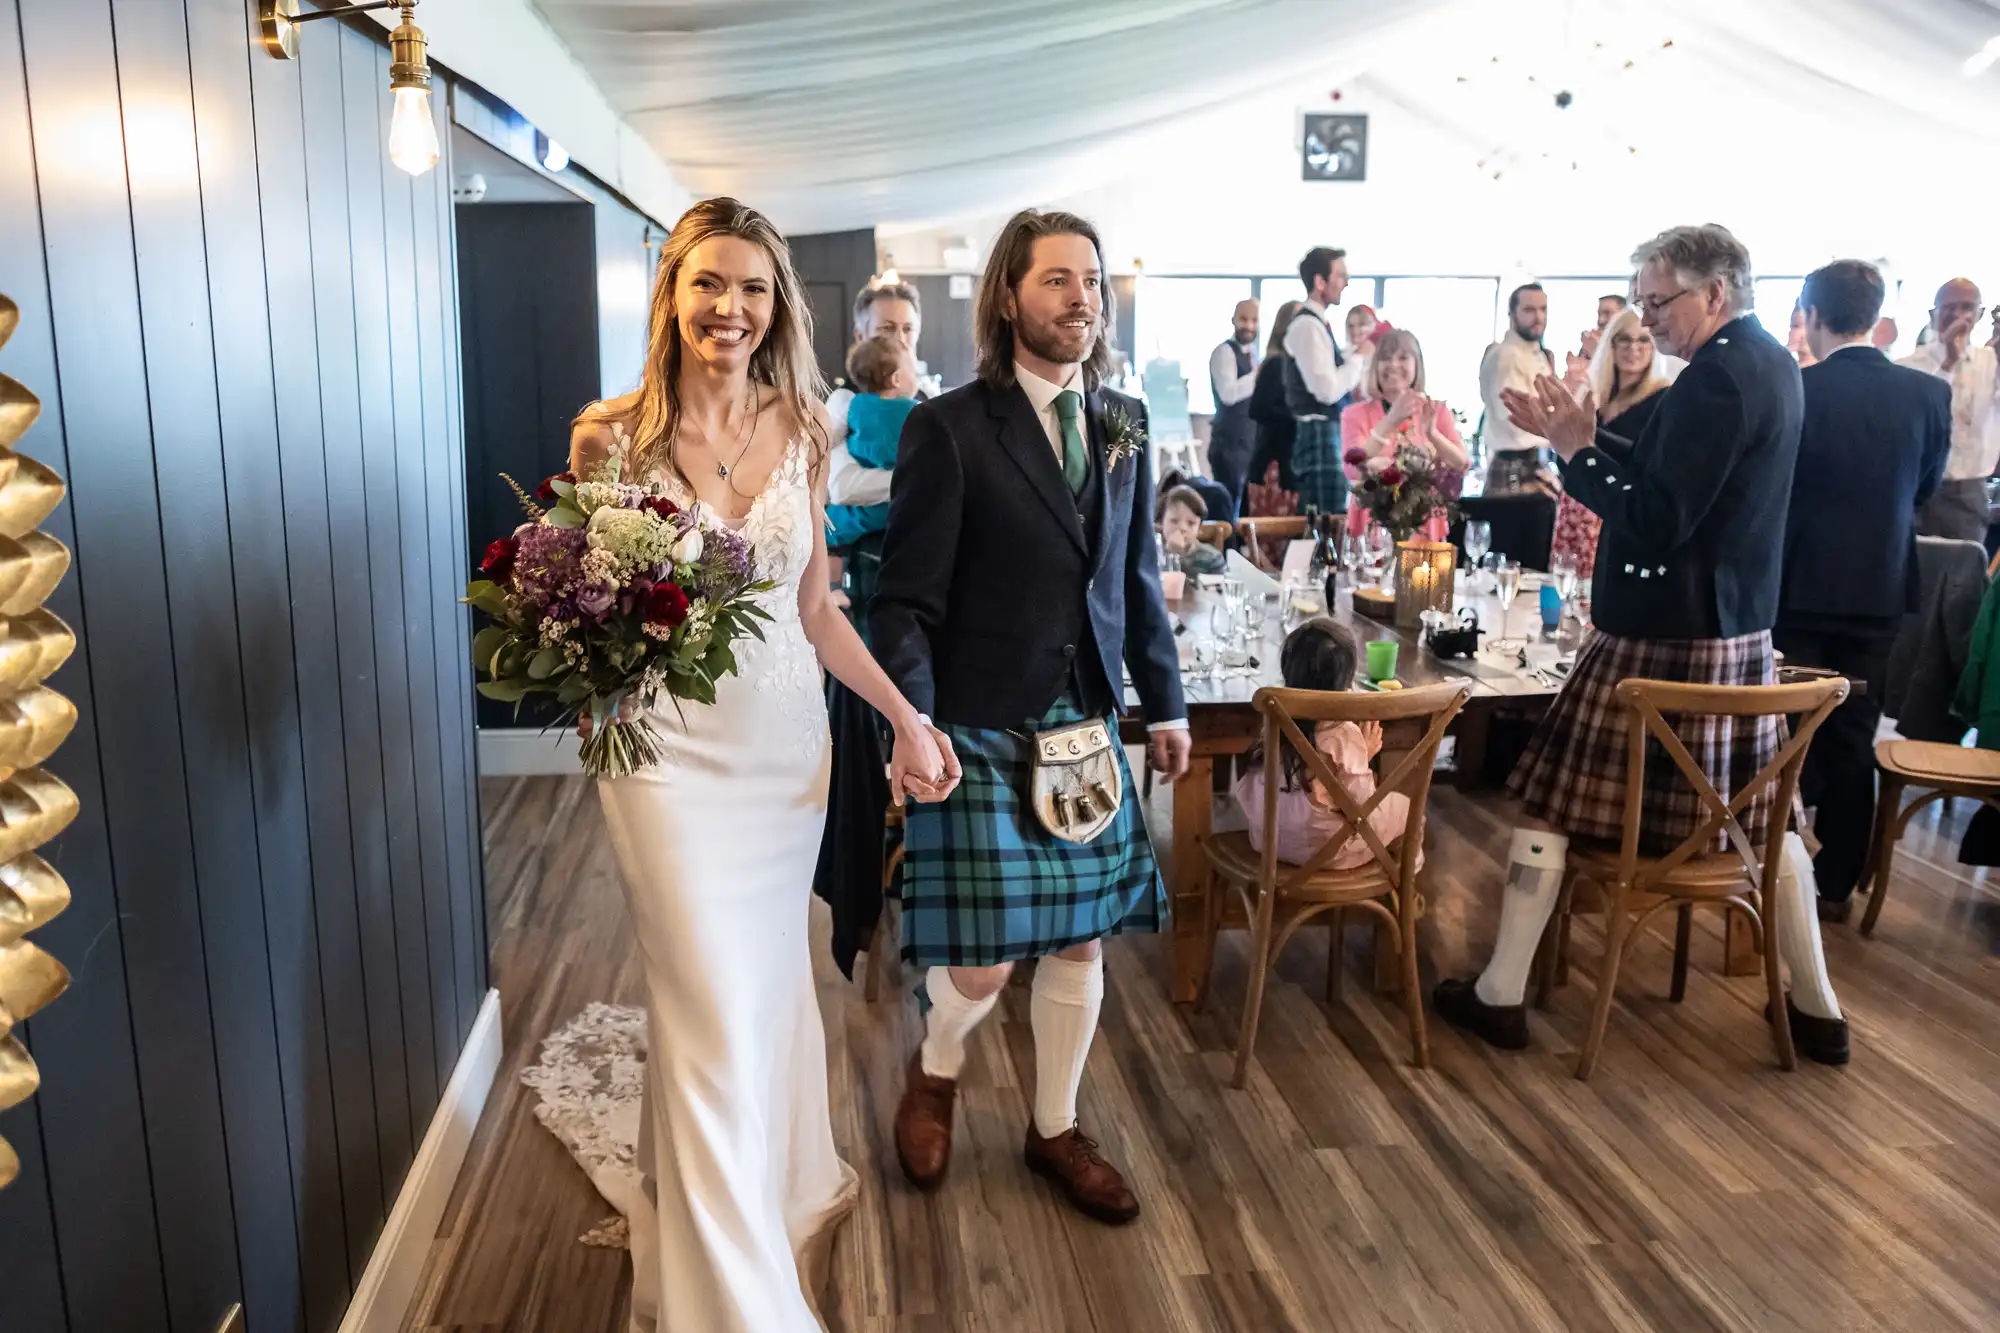 A bride in a white dress and groom in a kilt walk hand in hand in a reception hall, surrounded by applauding guests.